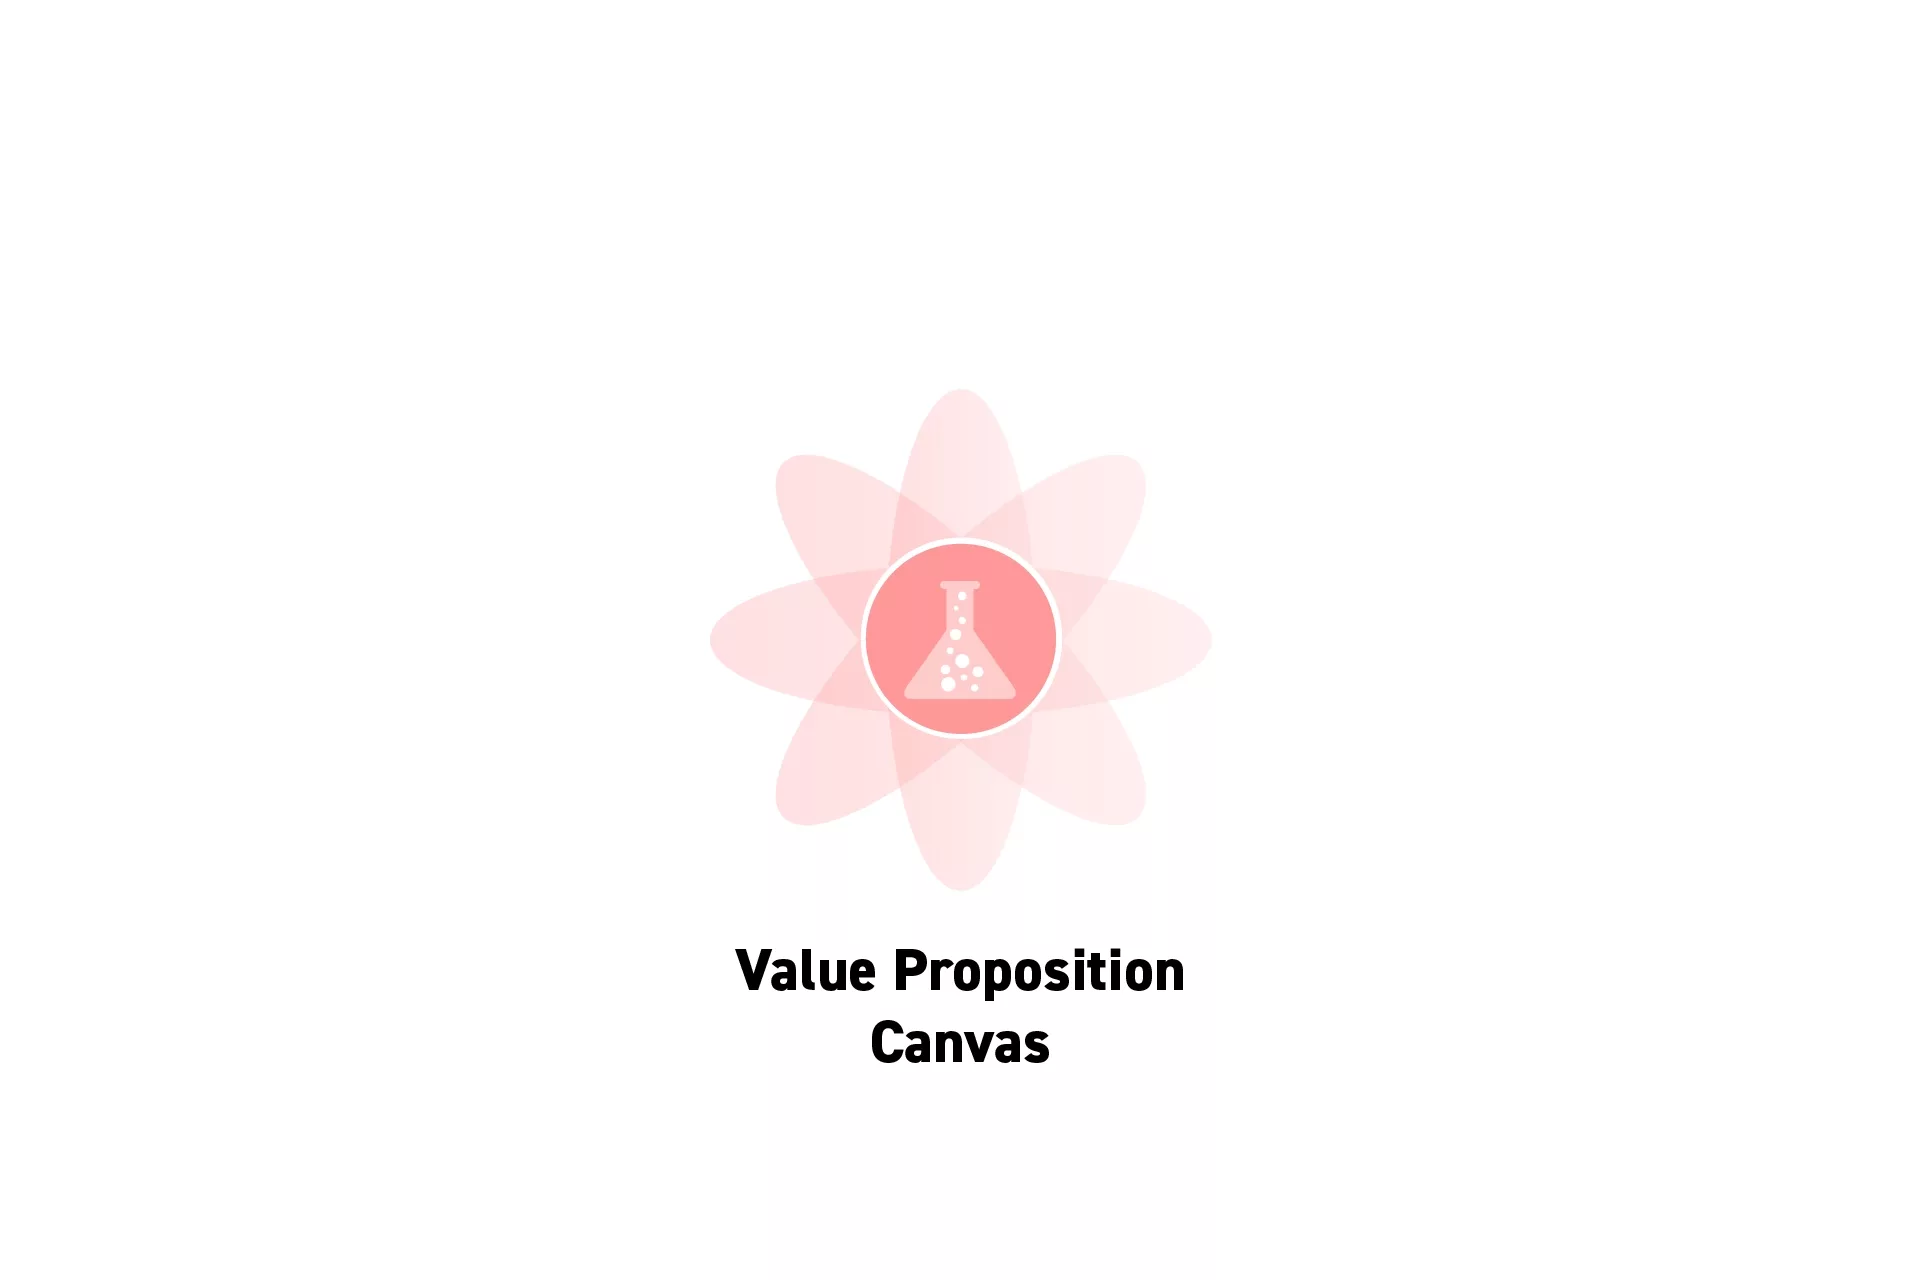 A flower that represents Strategy with the text “Value Proposition Canvas” beneath it.